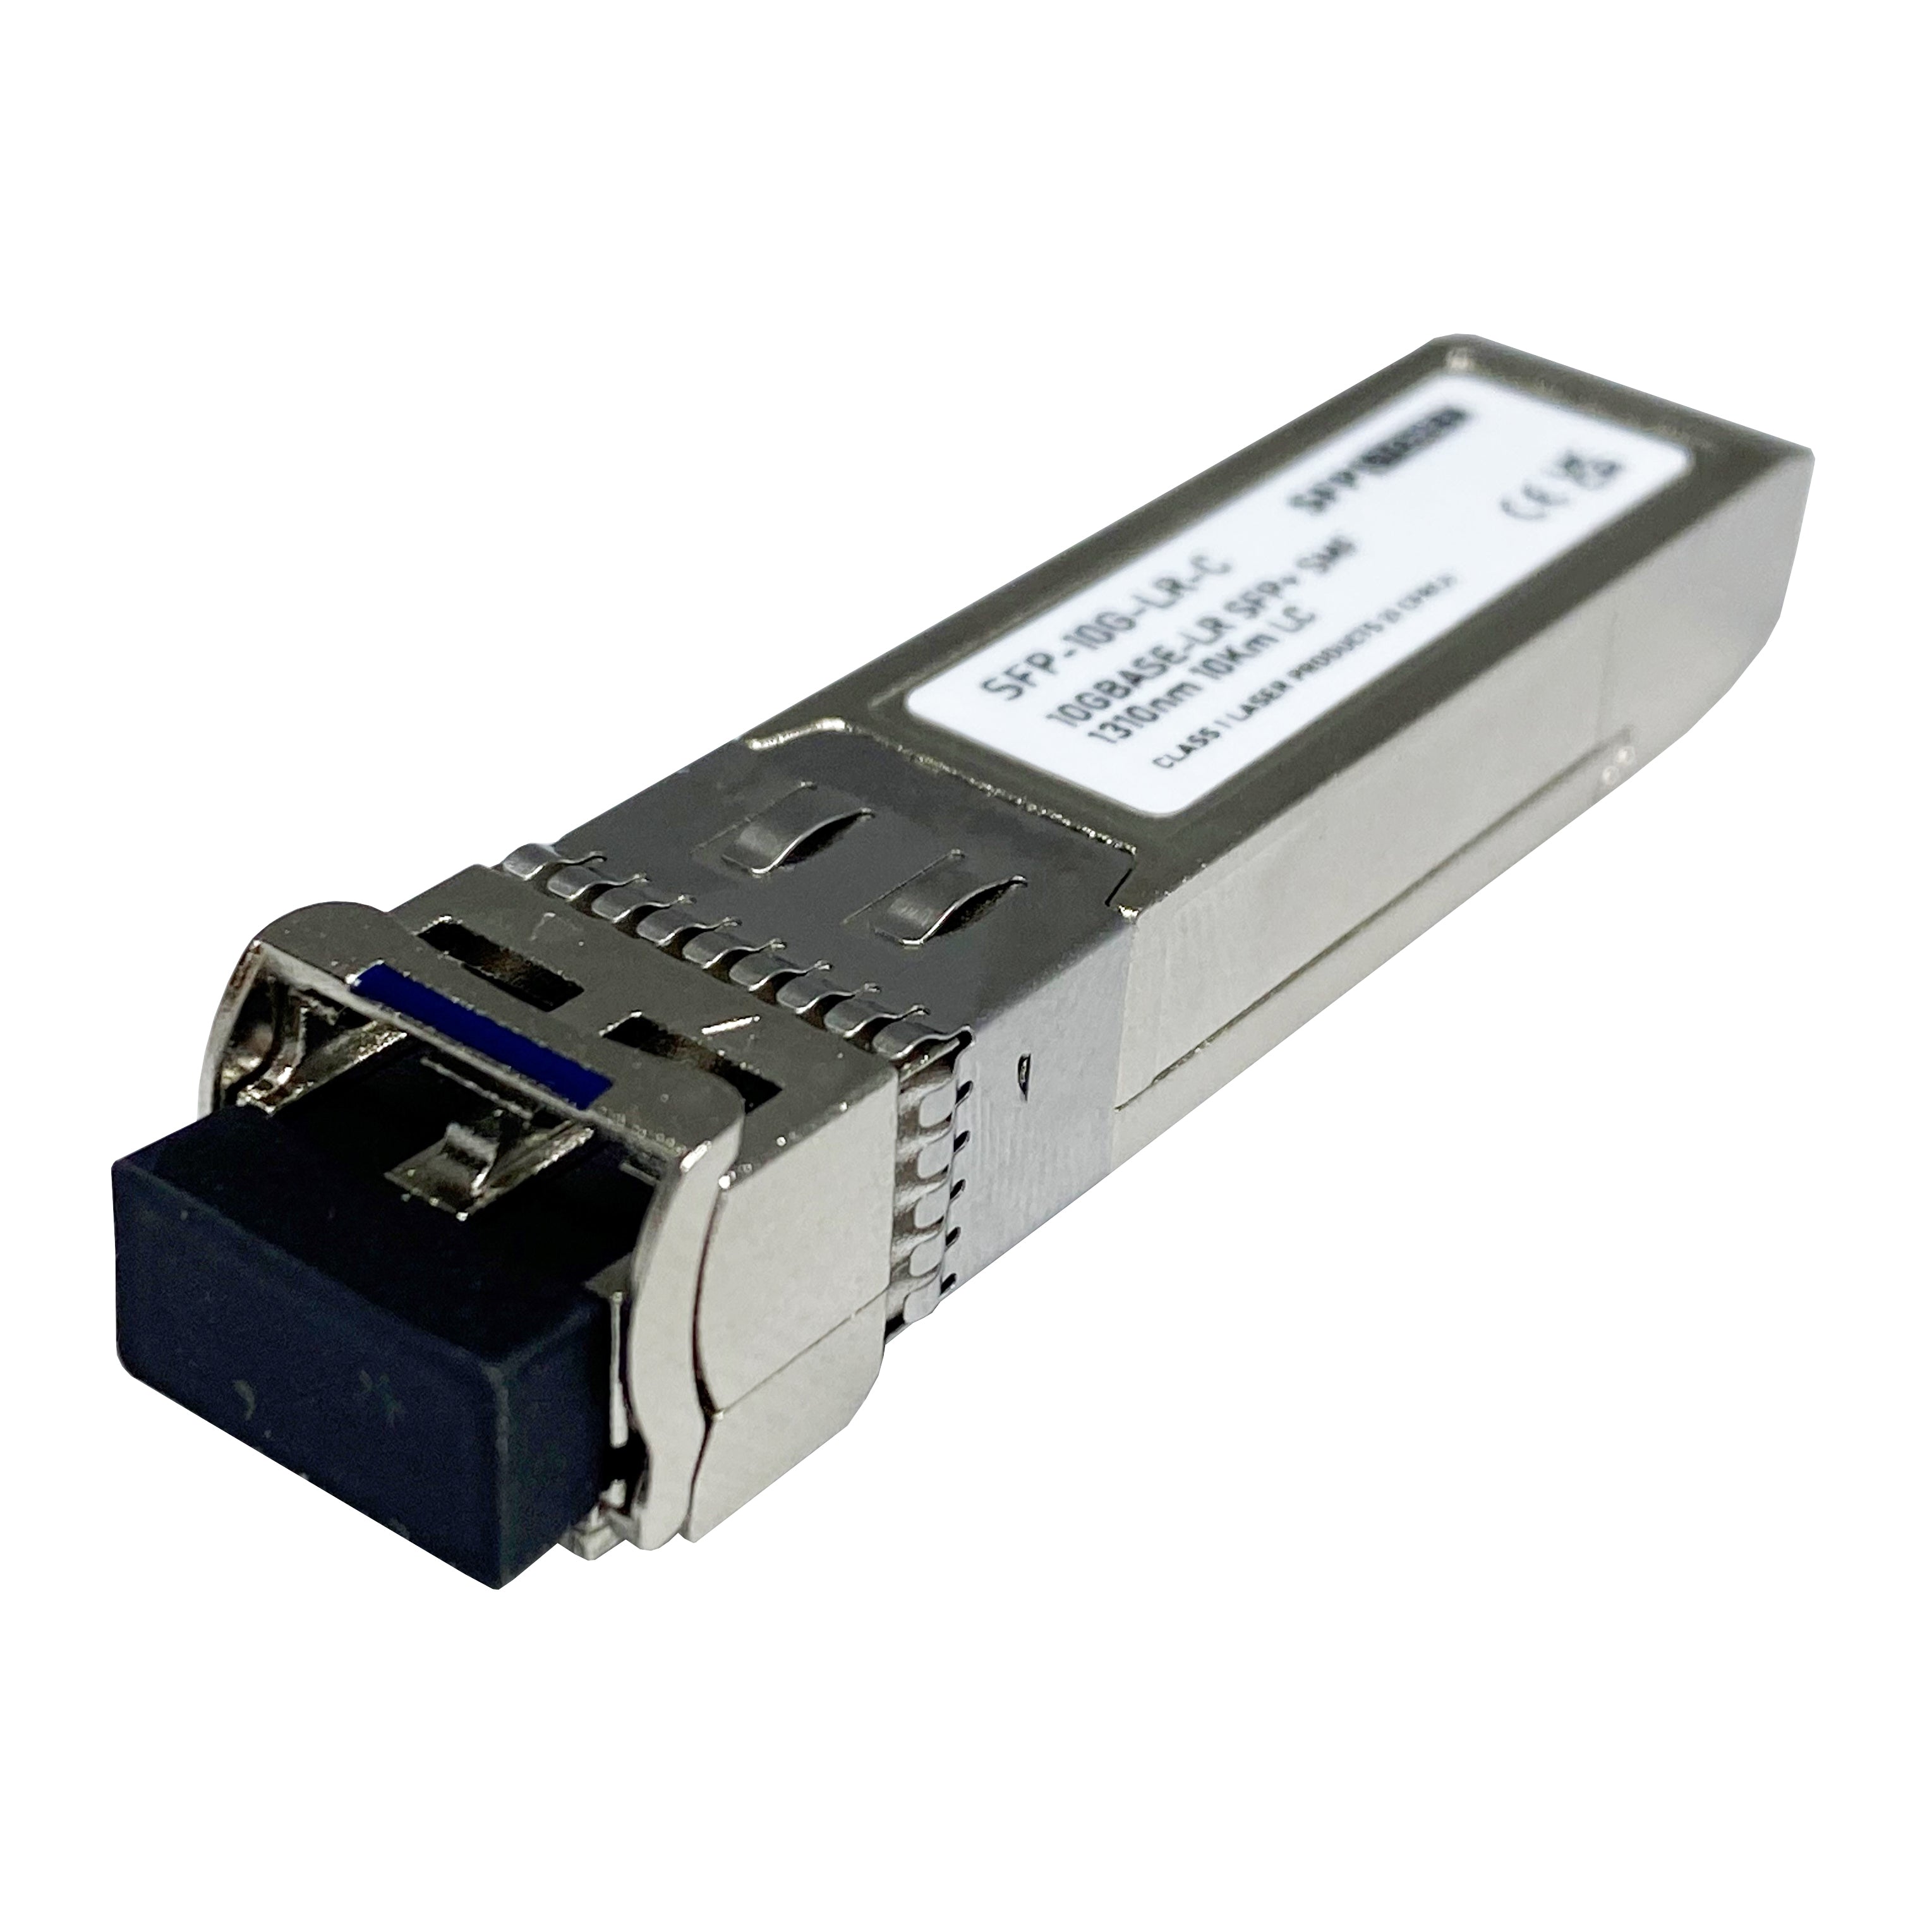 01-SSC-9786-C SonicWall Compatible 10G LR SFP+ LC Transceiver